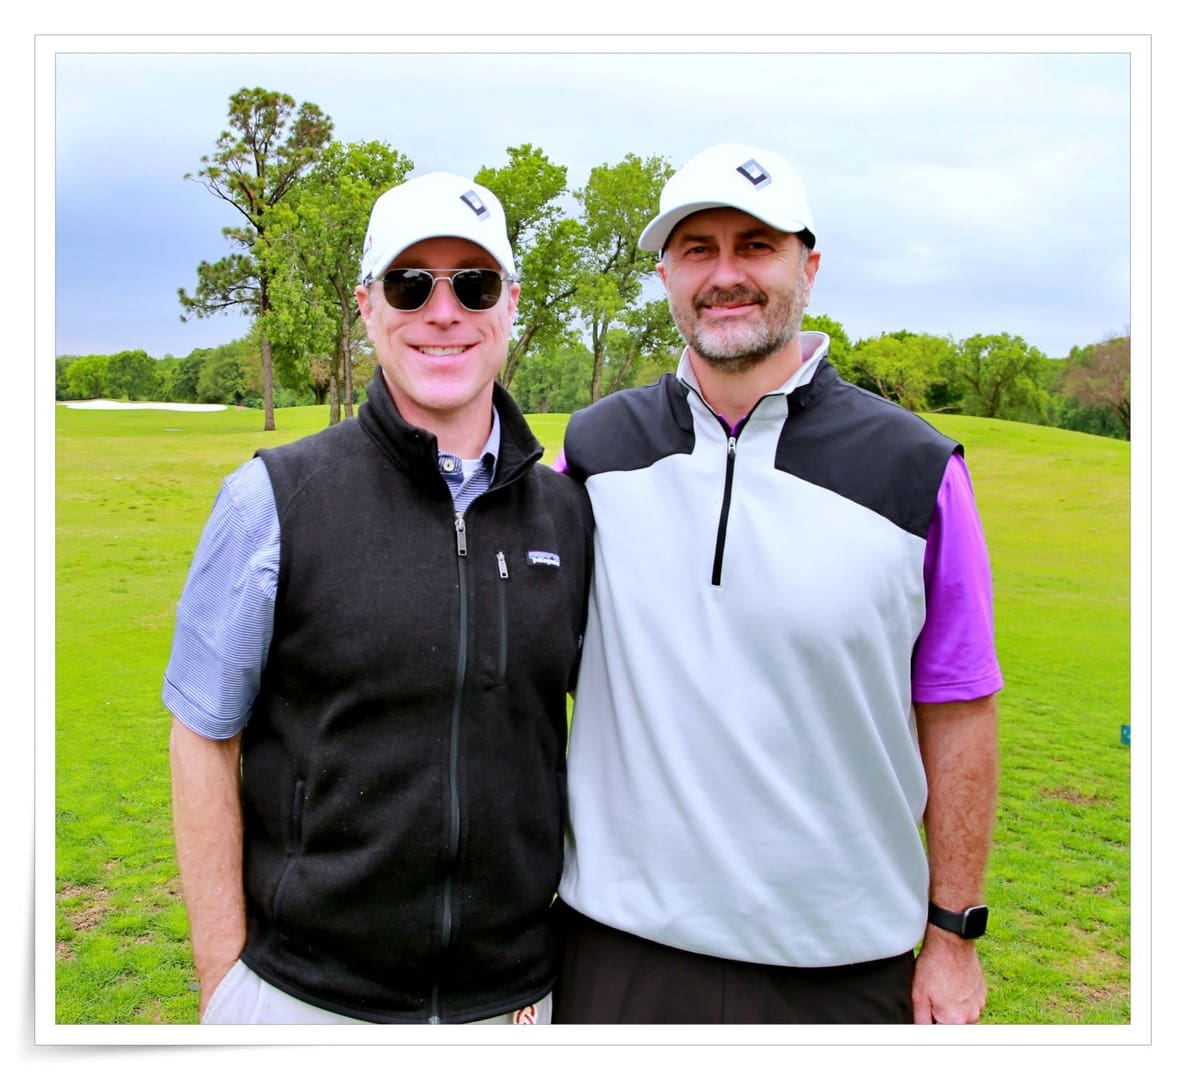 Two men posing for a photo on a golf course.